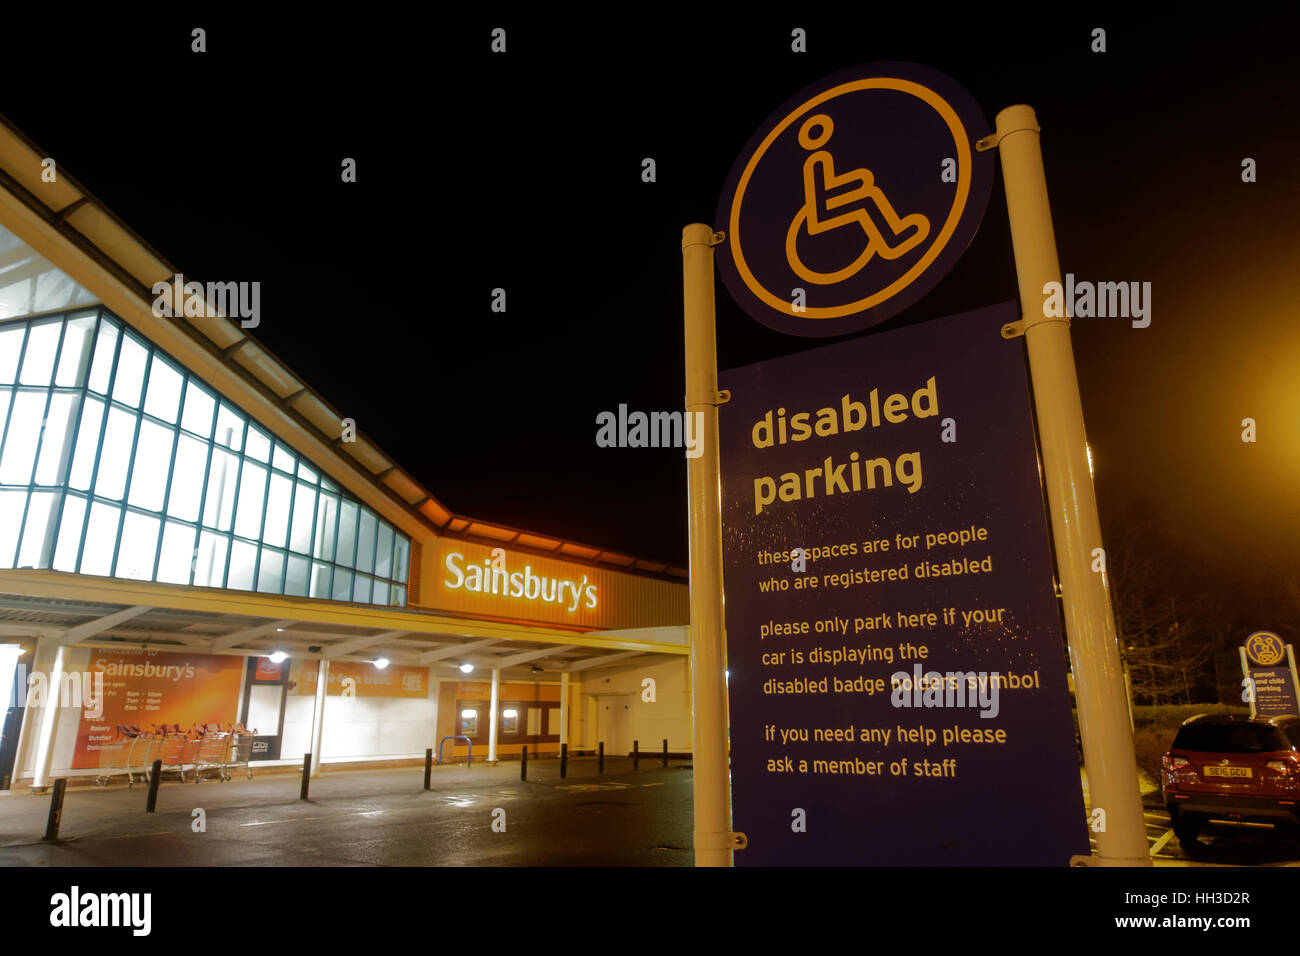 sainsbuty's disabled parking sign at night Great Western Retail Park Stock Photo